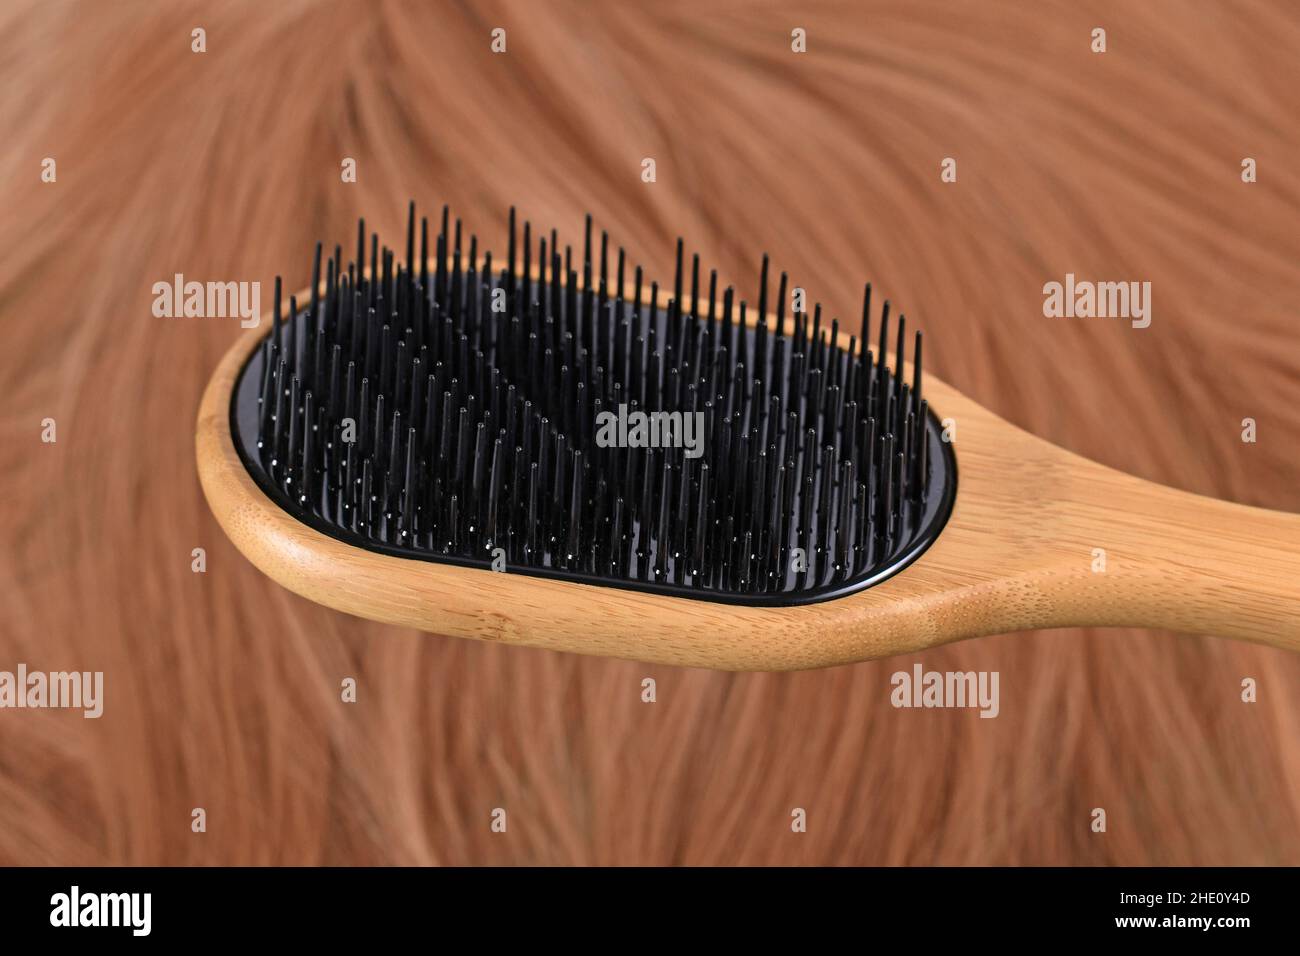 Detangler hair brush with different bristle lengths to separate hair instead of pulling it down Stock Photo